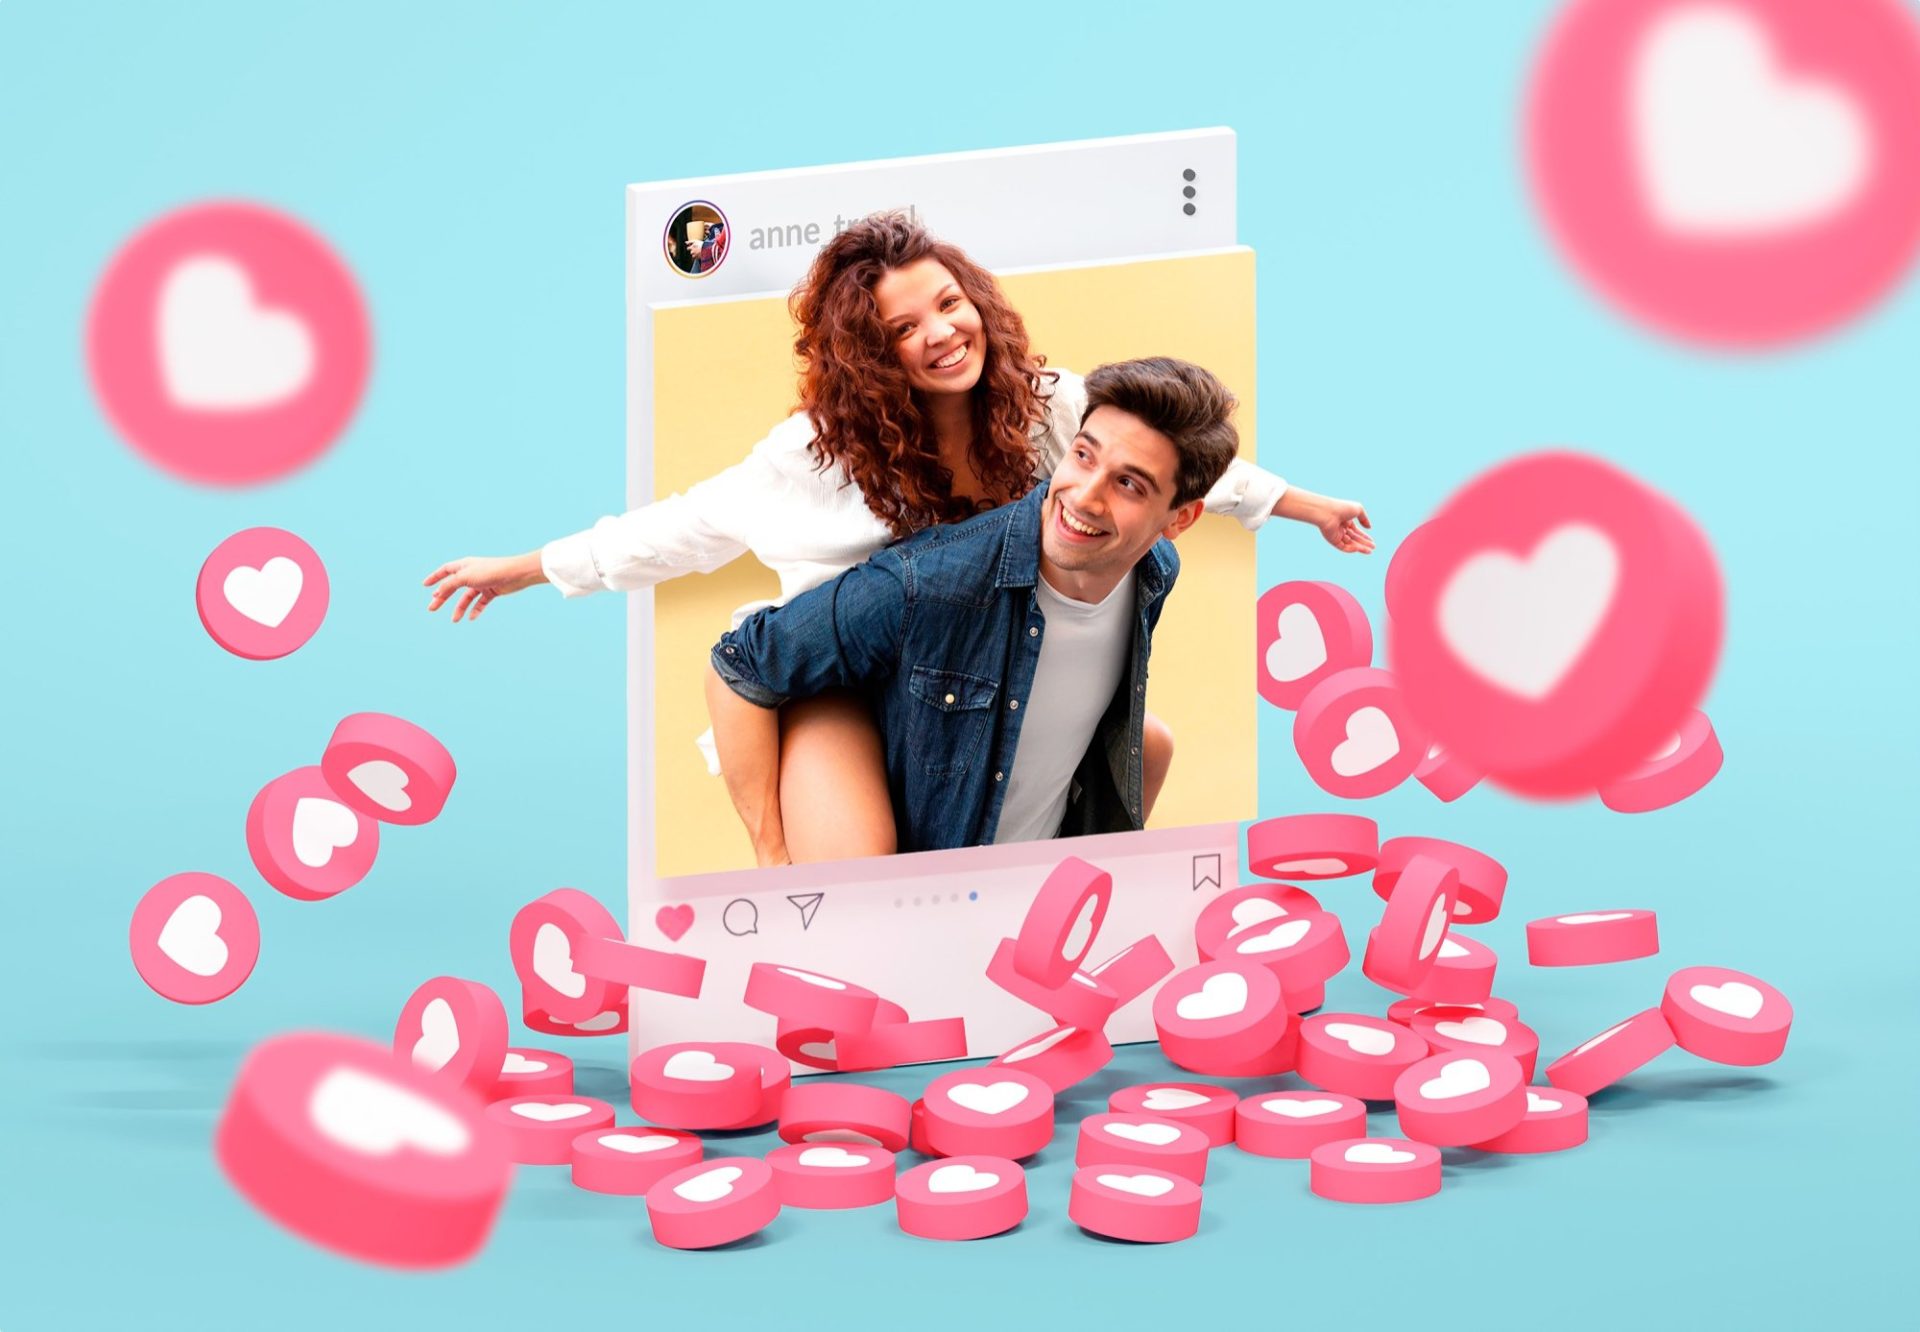 100 Hot Frequently Asked Questions On Tinder 